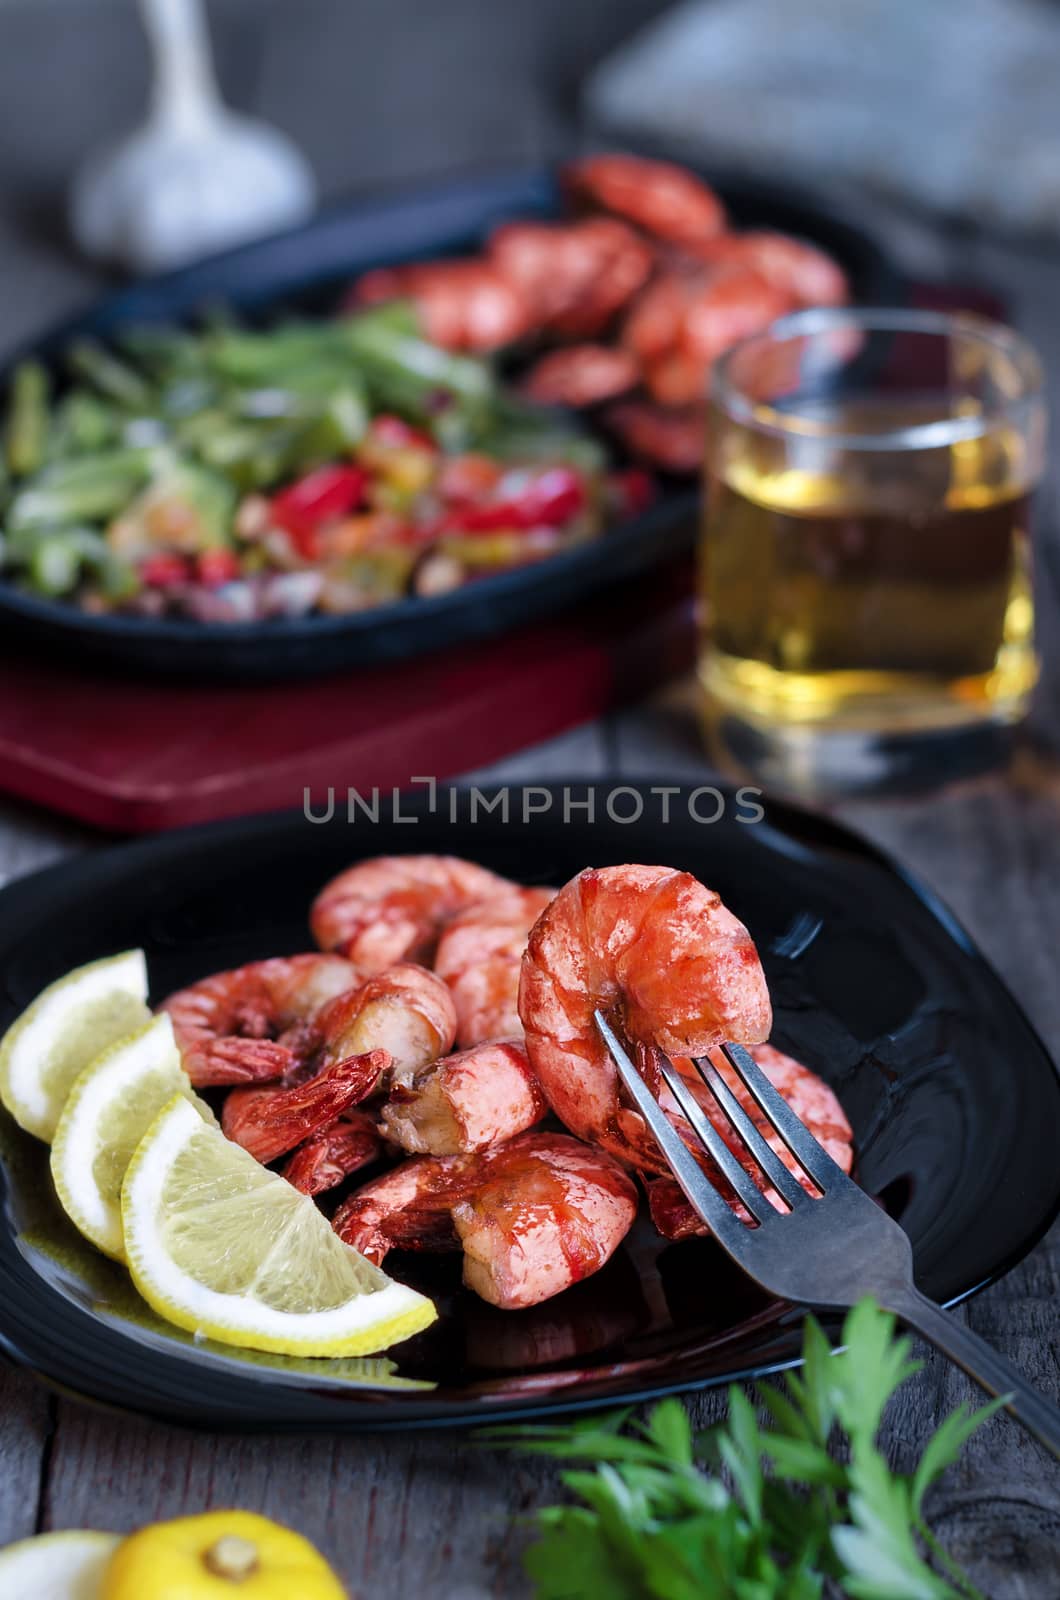 Grilled prawns with lemon, vegetables and beer. Rustic, low key and bokeh.